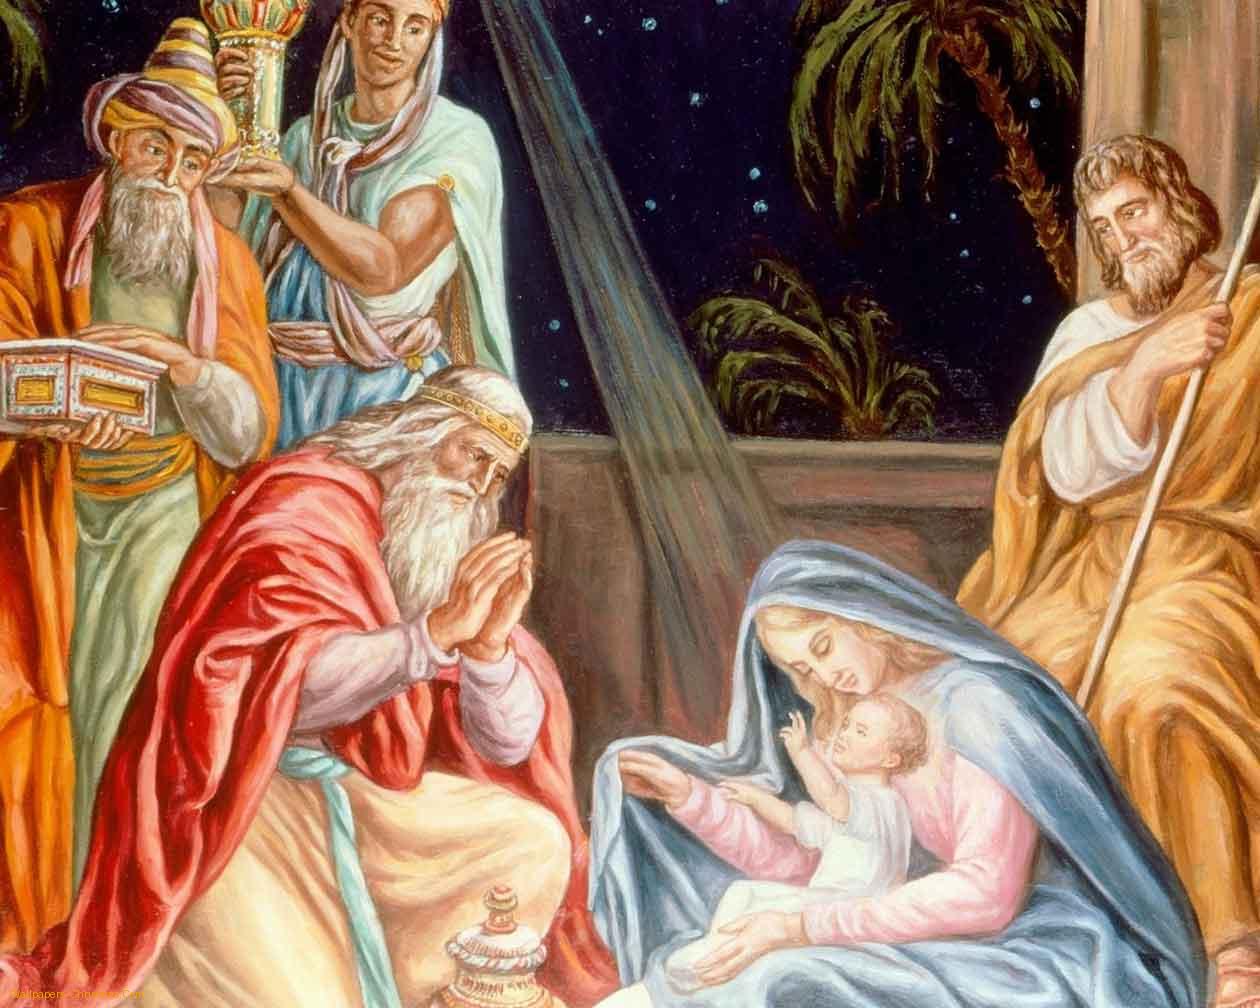 Free Download Christmas Wallpaper Nativity Scene Wallpapers9 1260x1008 For Your Desktop Mobile Tablet Explore 46 Christmas Nativity Scene Wallpaper Christmas Nativity Scene Wallpaper Nativity Scene Background Nativity Scene Wallpaper